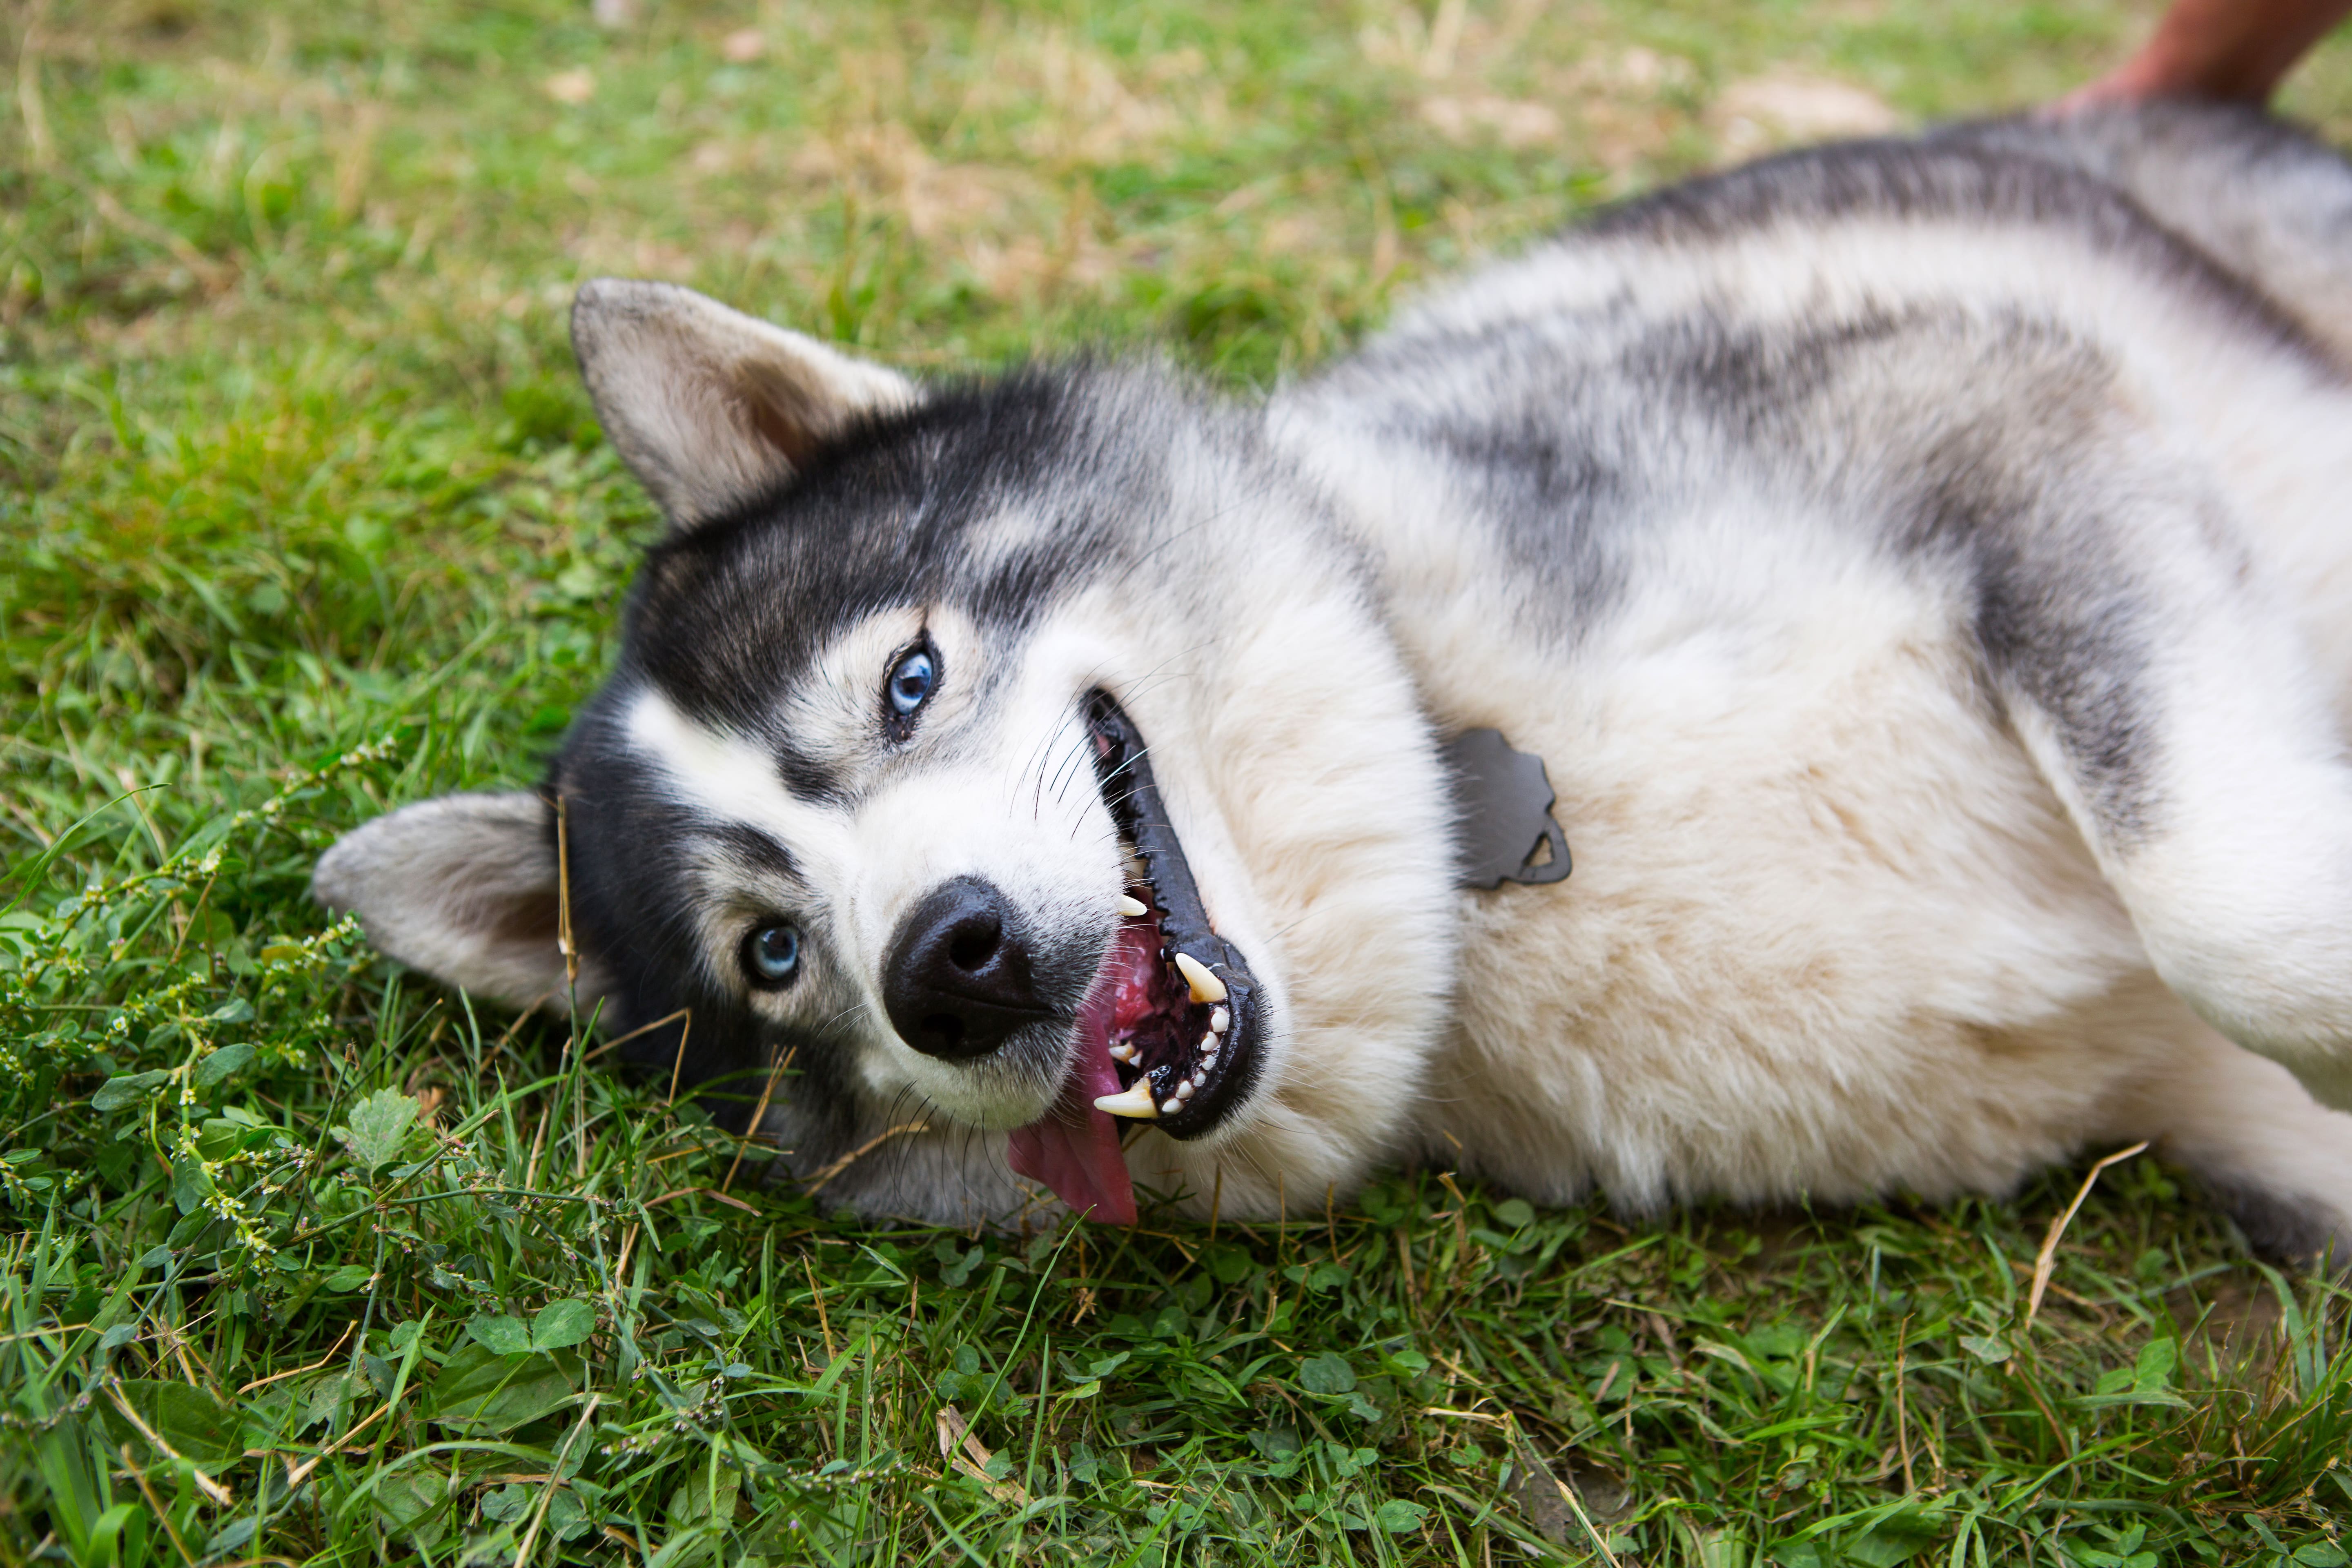 Husky dog is lying contentedly on the grass with his tongue hanging out,